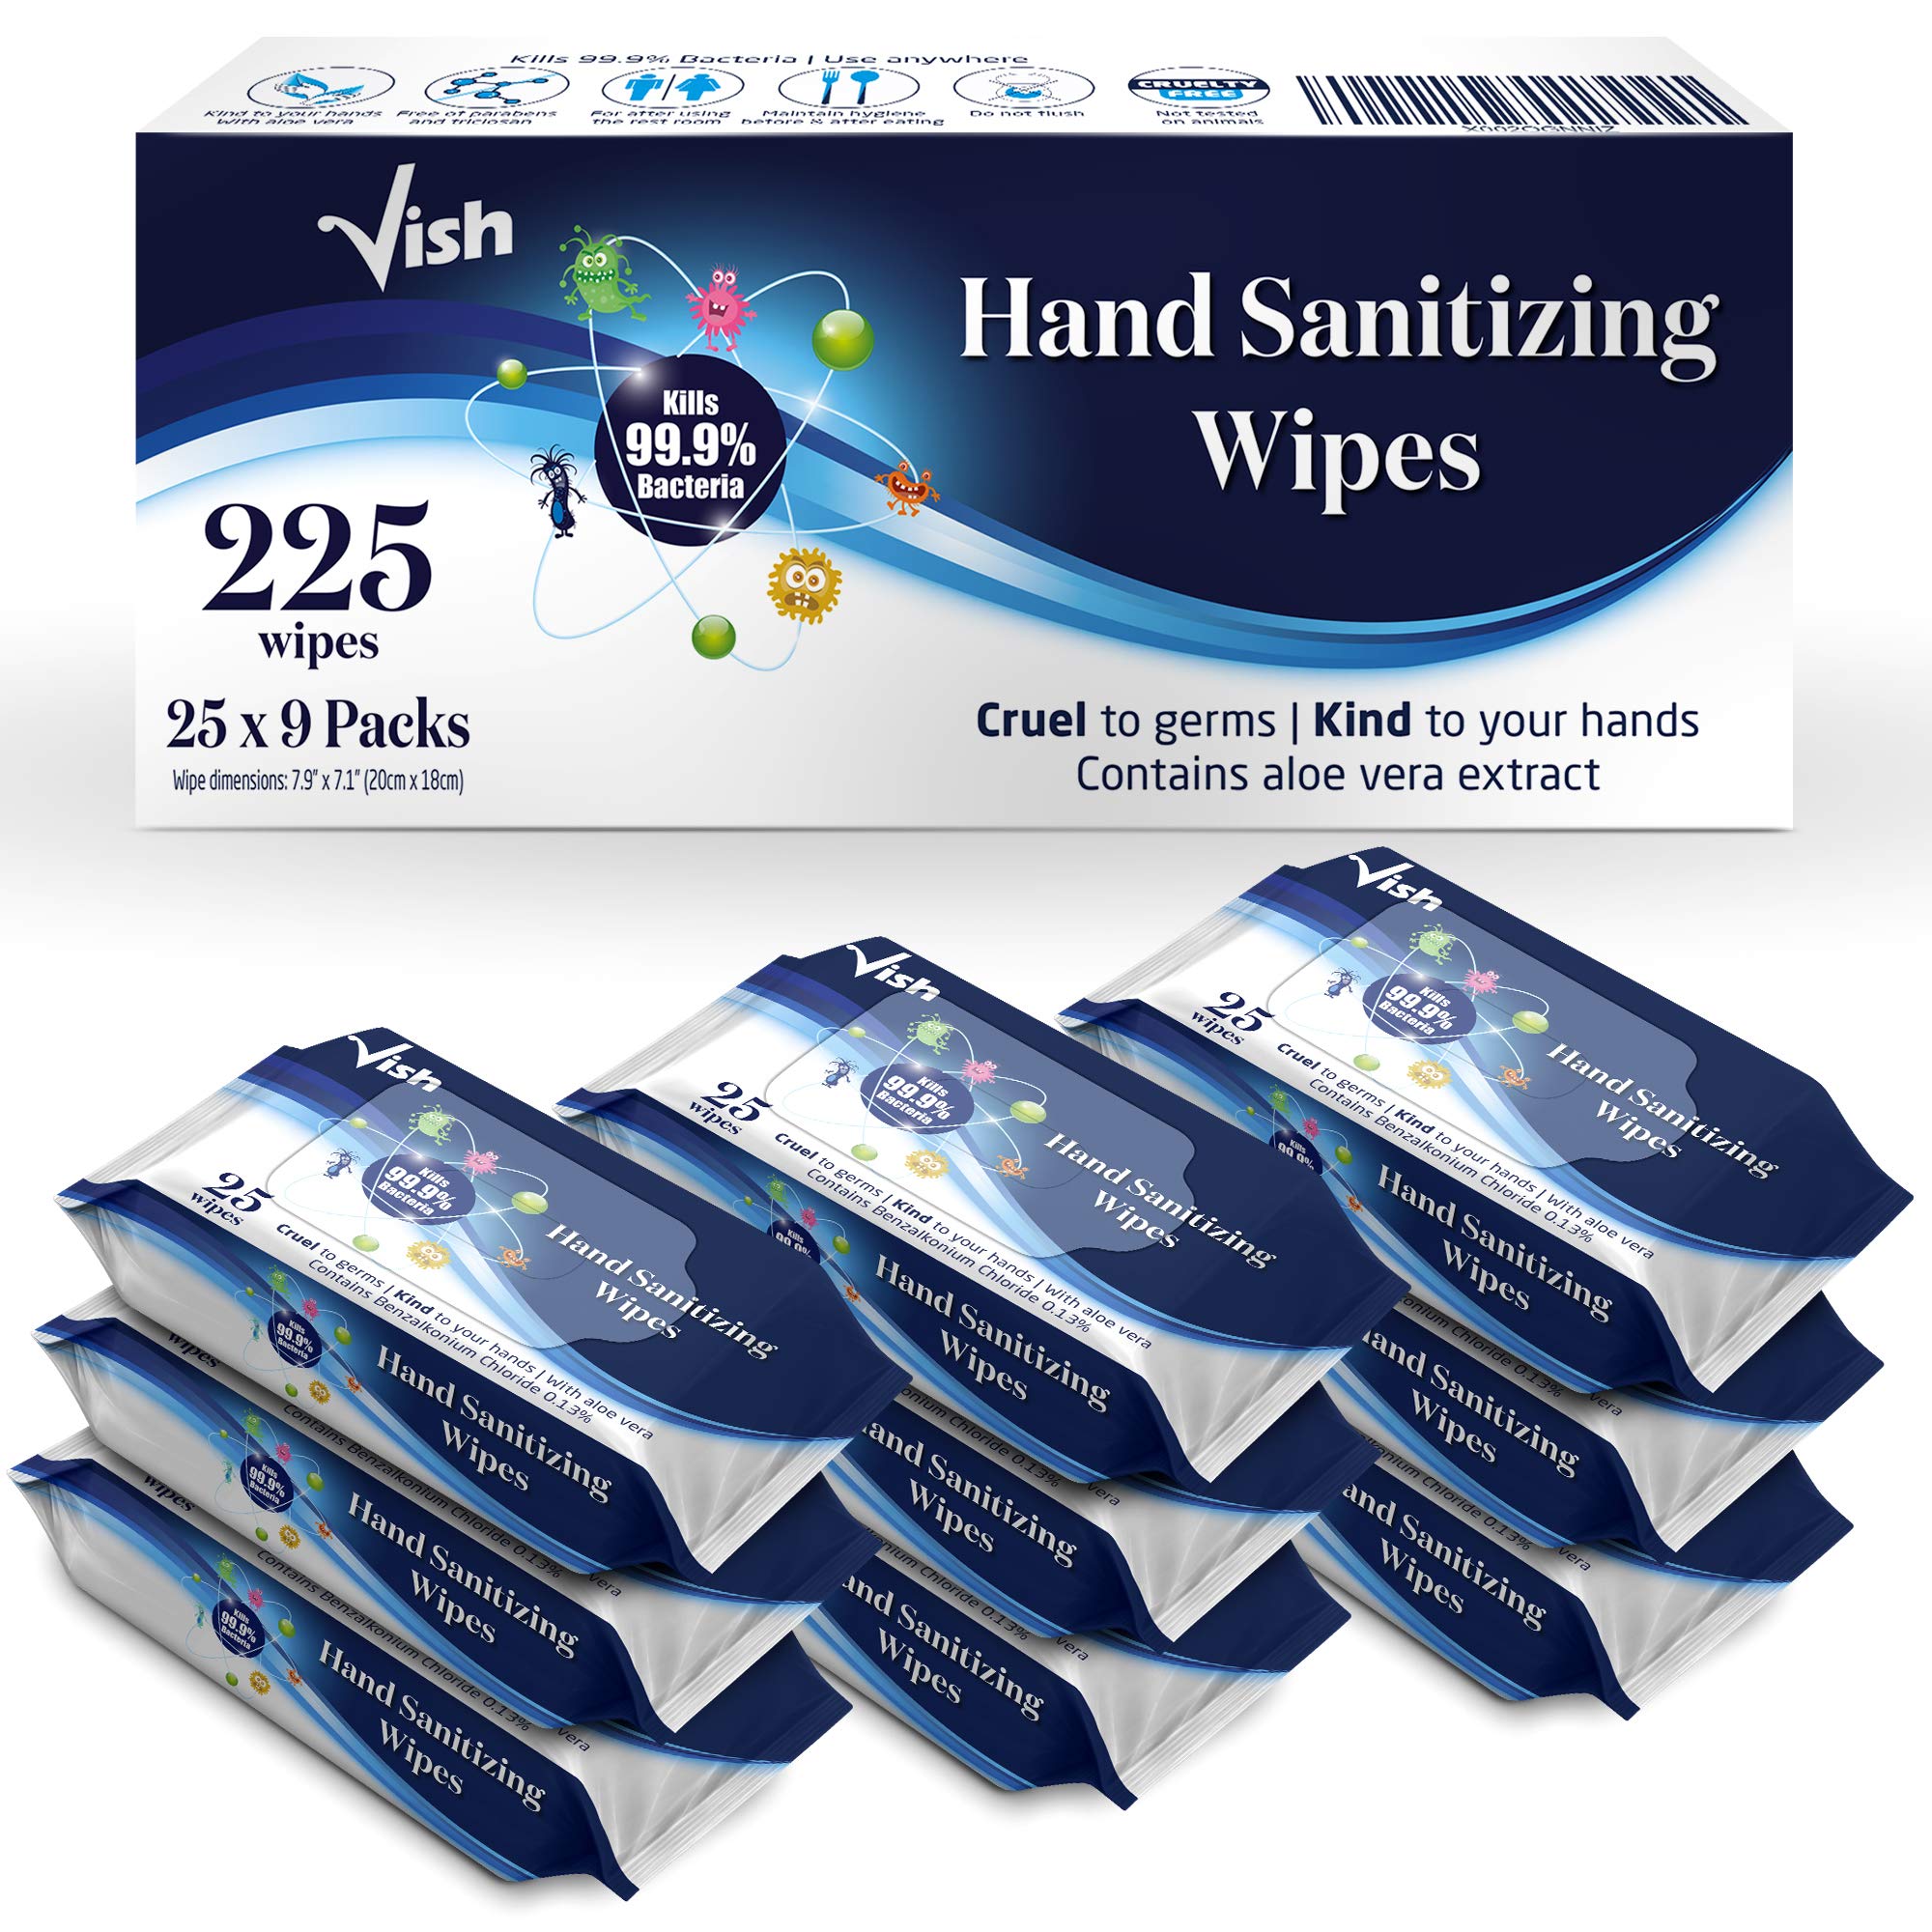 Hand Sanitizing Wipes - Kills 99.9% of Germs